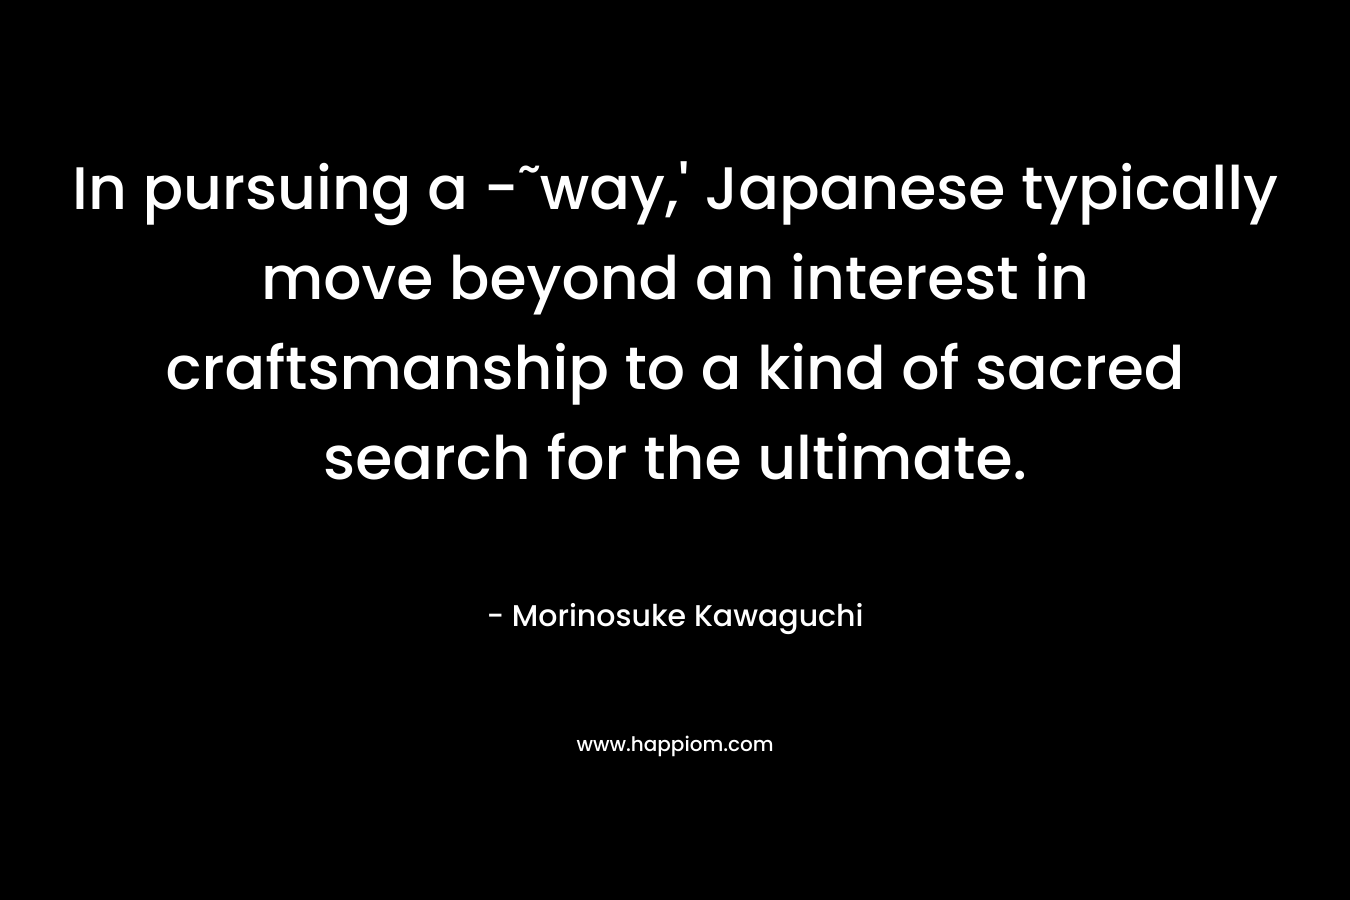 In pursuing a -˜way,’ Japanese typically move beyond an interest in craftsmanship to a kind of sacred search for the ultimate. – Morinosuke Kawaguchi